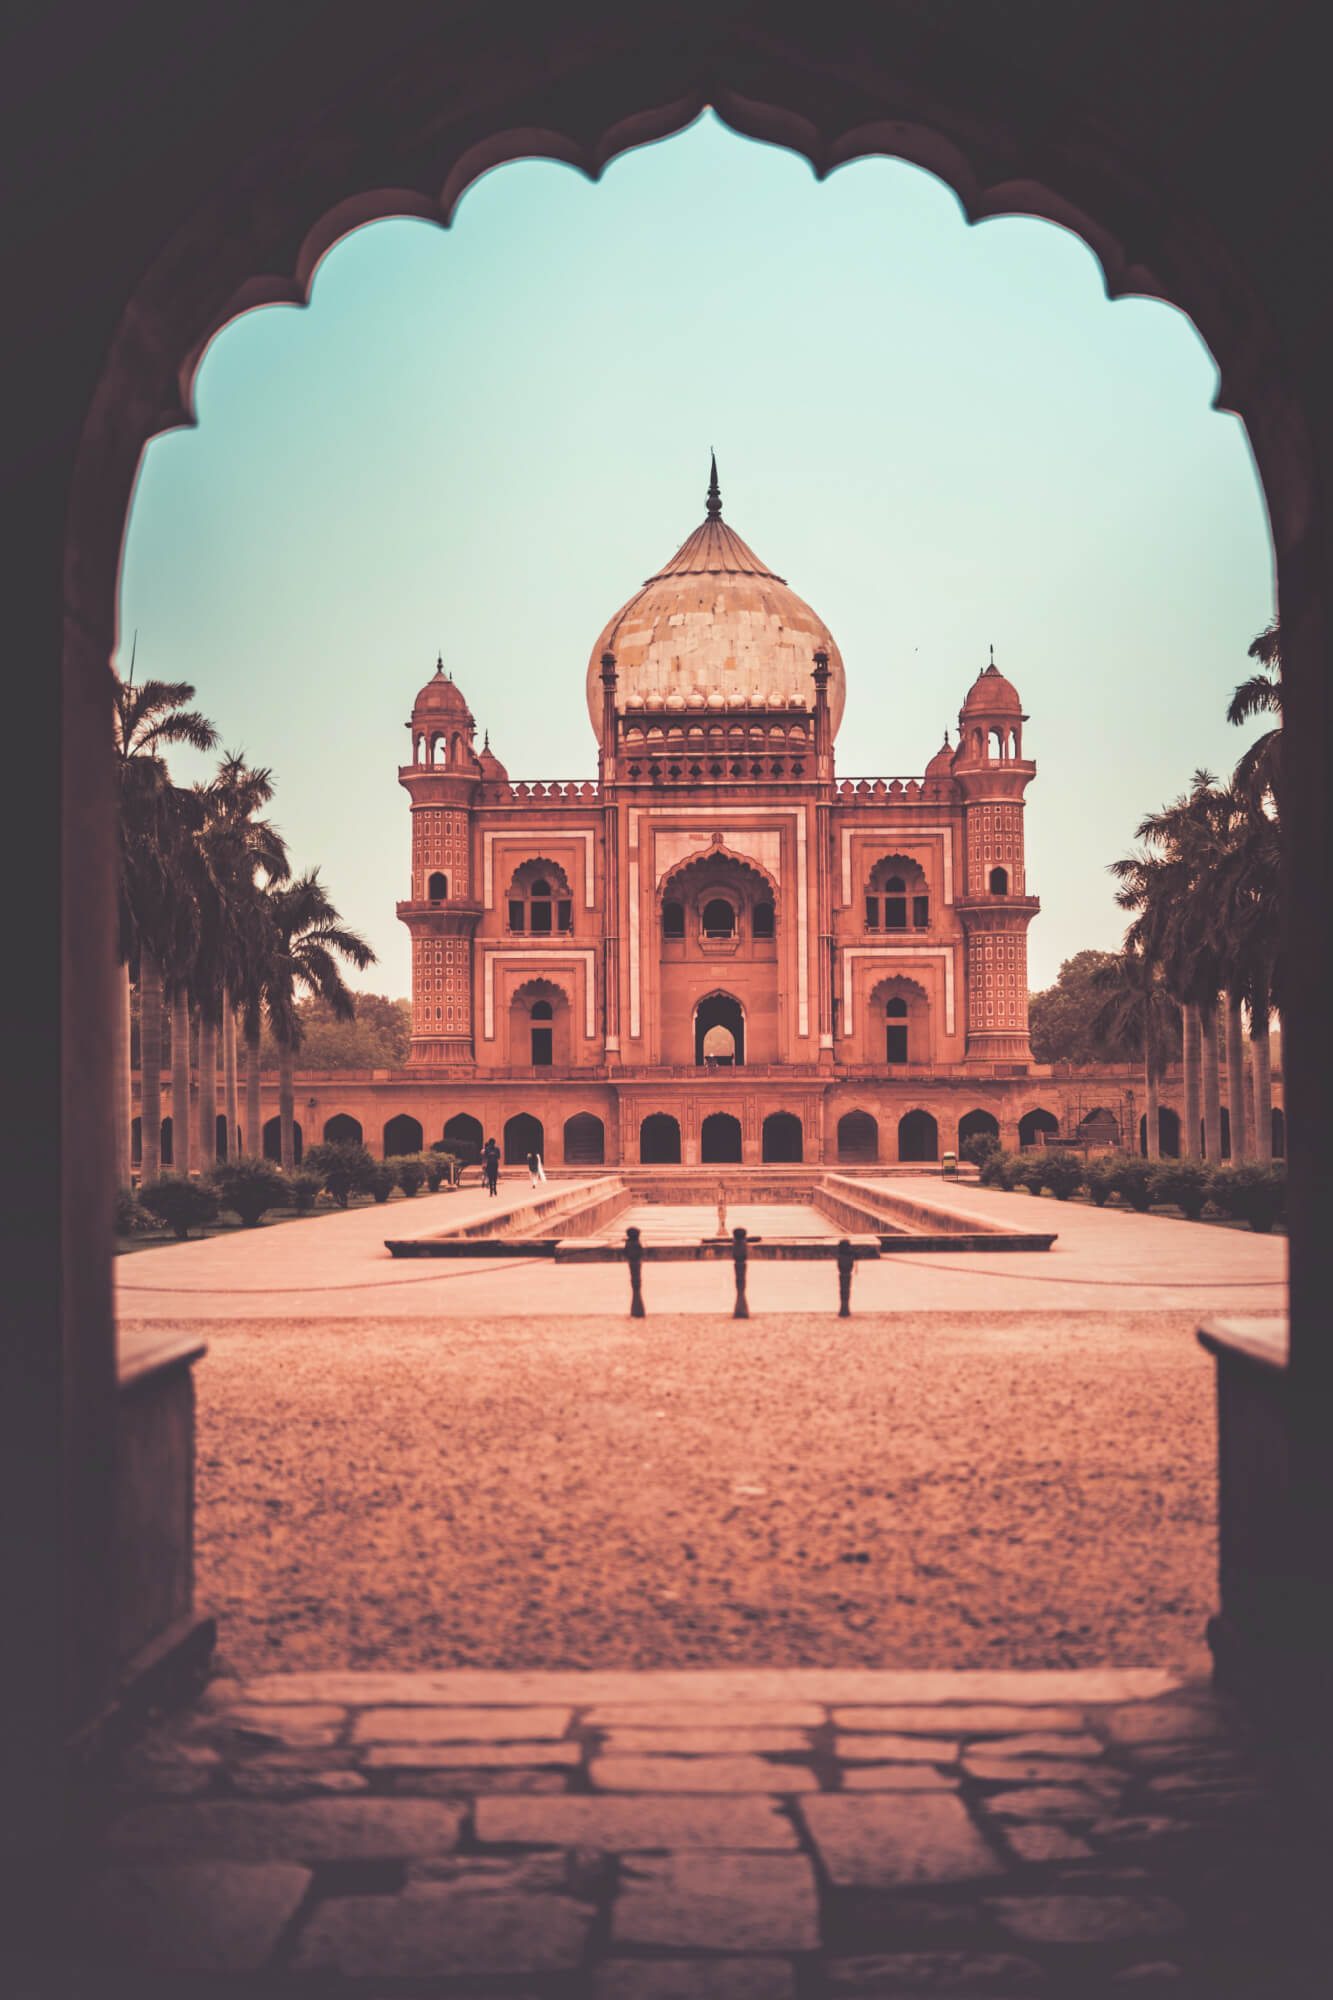 New Delhi is up there as one of the best cheap places to travel to in Asia.